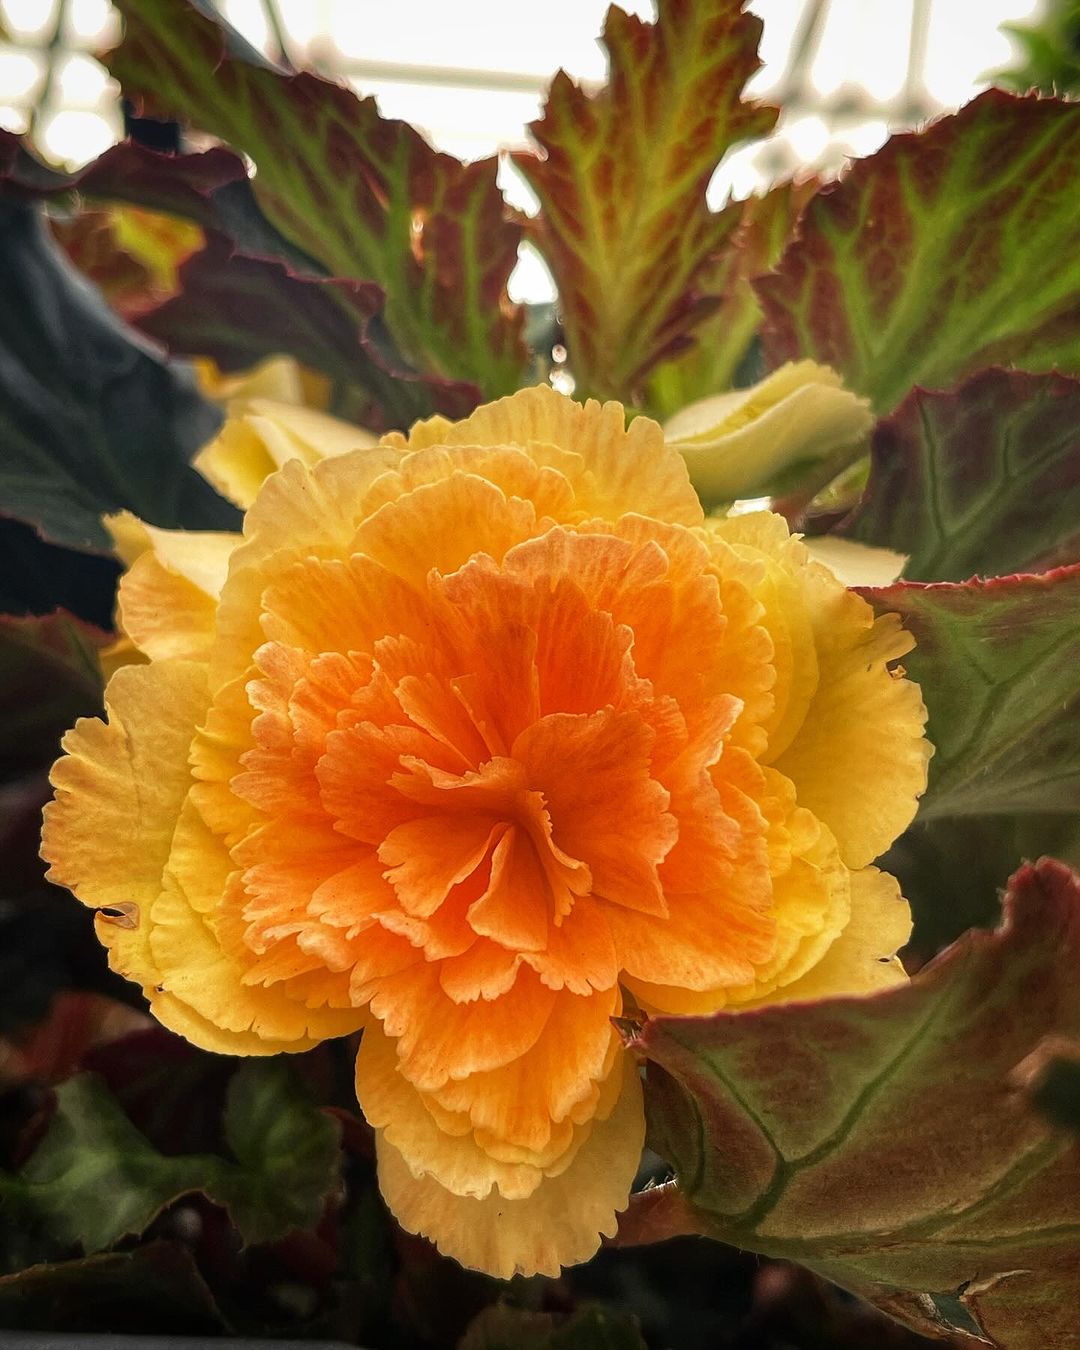 Bright yellow Begonia flower contrasted by fresh green leaves in a greenhouse.